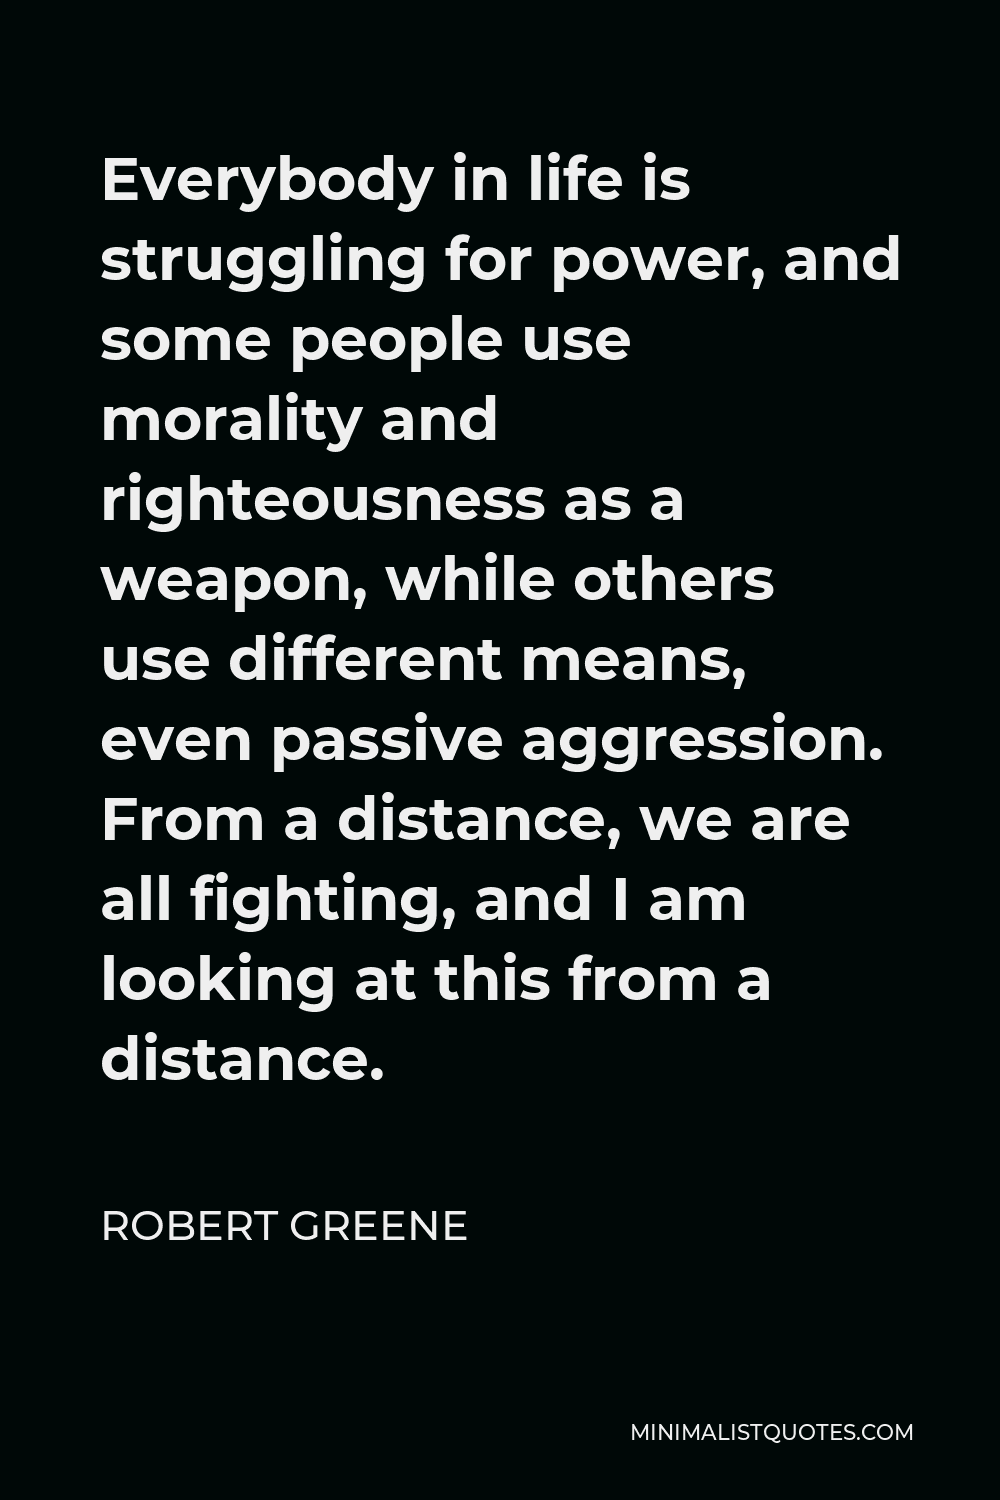 Robert Greene Quote - Everybody in life is struggling for power, and some people use morality and righteousness as a weapon, while others use different means, even passive aggression. From a distance, we are all fighting, and I am looking at this from a distance.